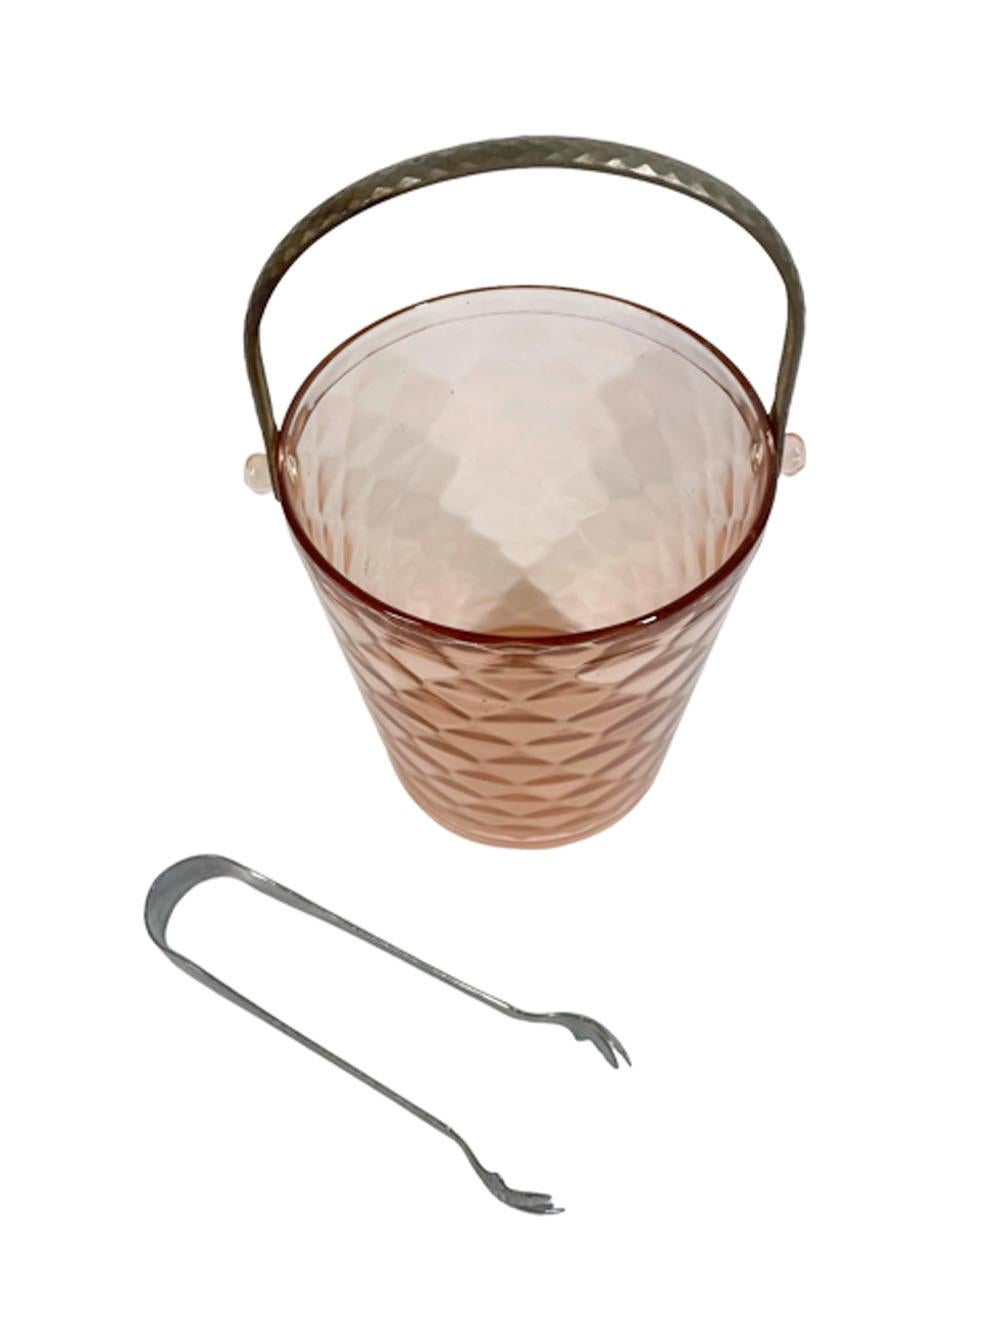 Art Deco pink glass Ice bucket in mold-blown optic diamond pattern, the rim with molded lugs to which the metal swing handle attaches. Ice tongs included.